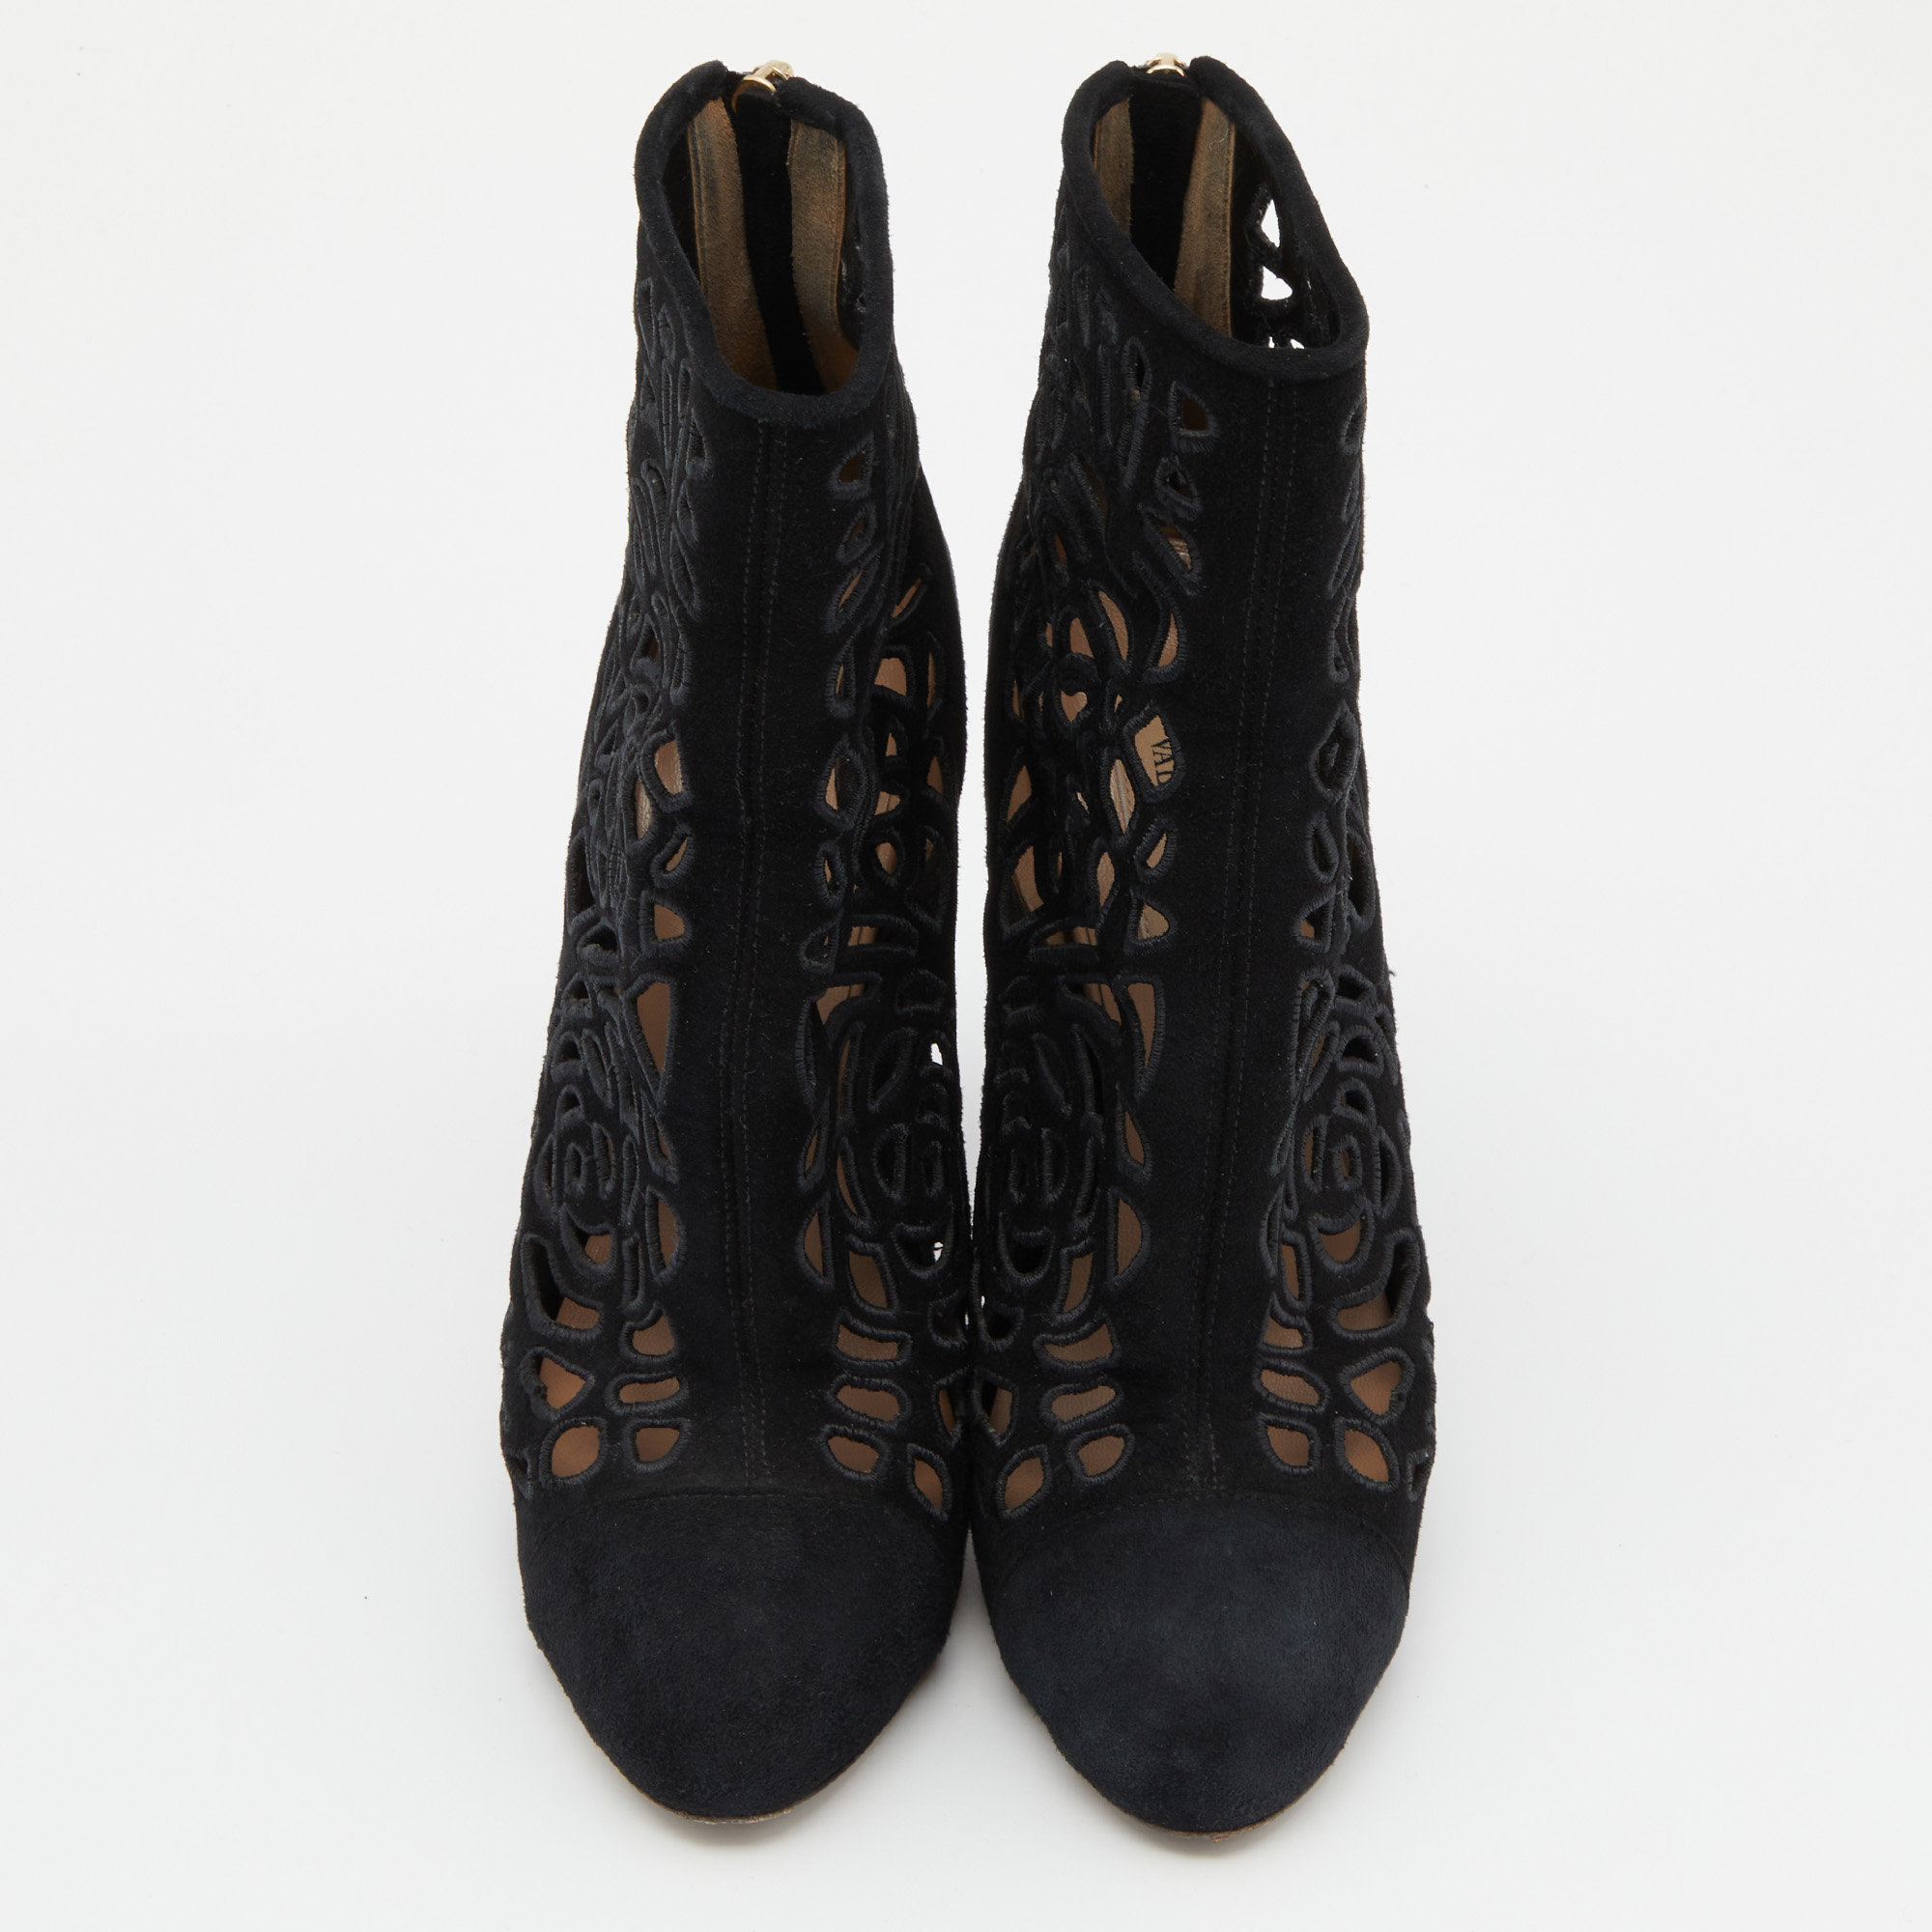 Valentino Black Laser Cut Suede Ankle Length Boots Size 38